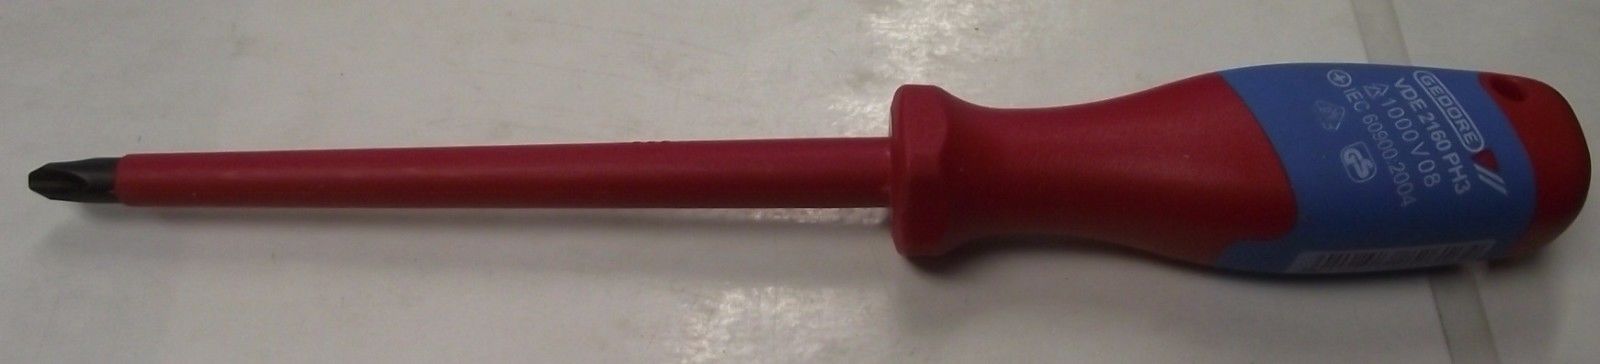 Gedore VDE 2160 PH 3 Vde Insulated #3 Phillips Screwdriver Germany